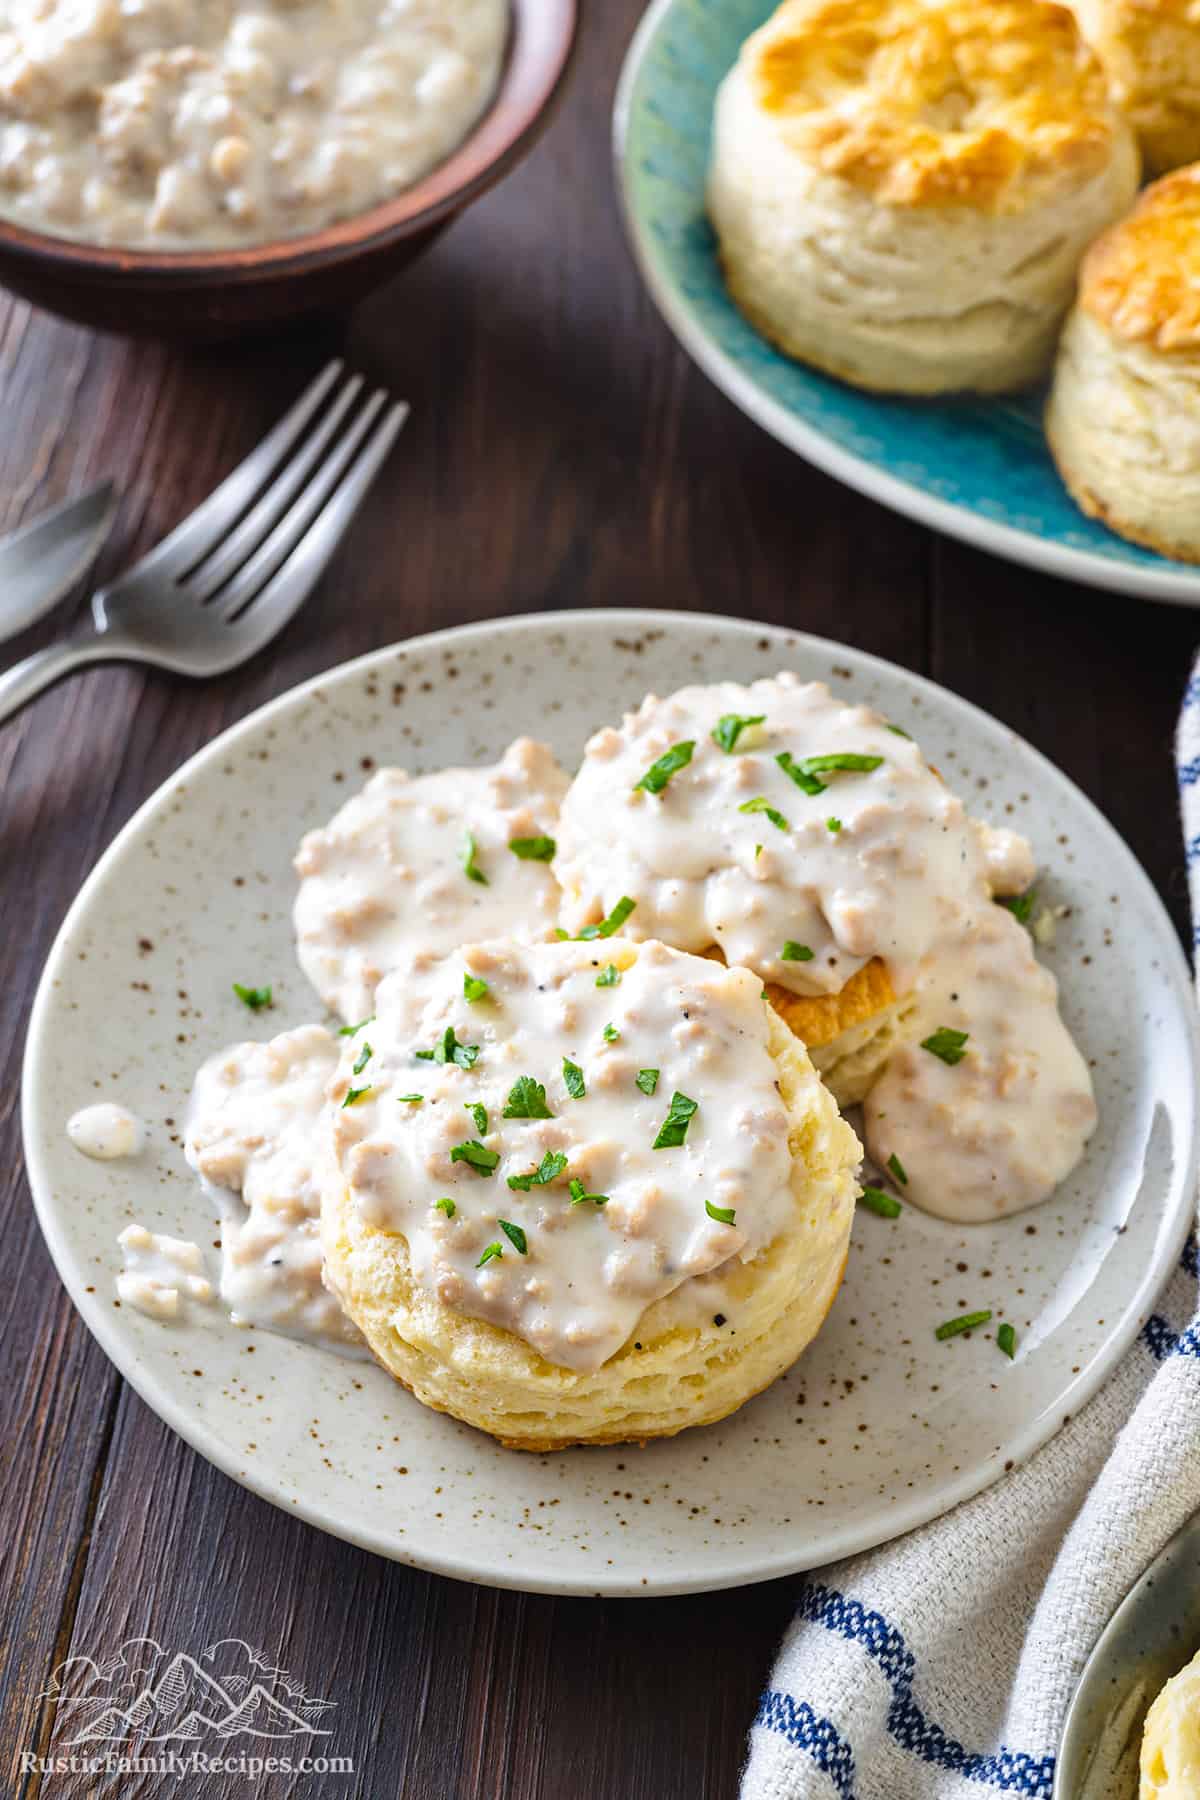 Two cathead biscuits smothered in gravy and garnished with fresh parsley on a plate.